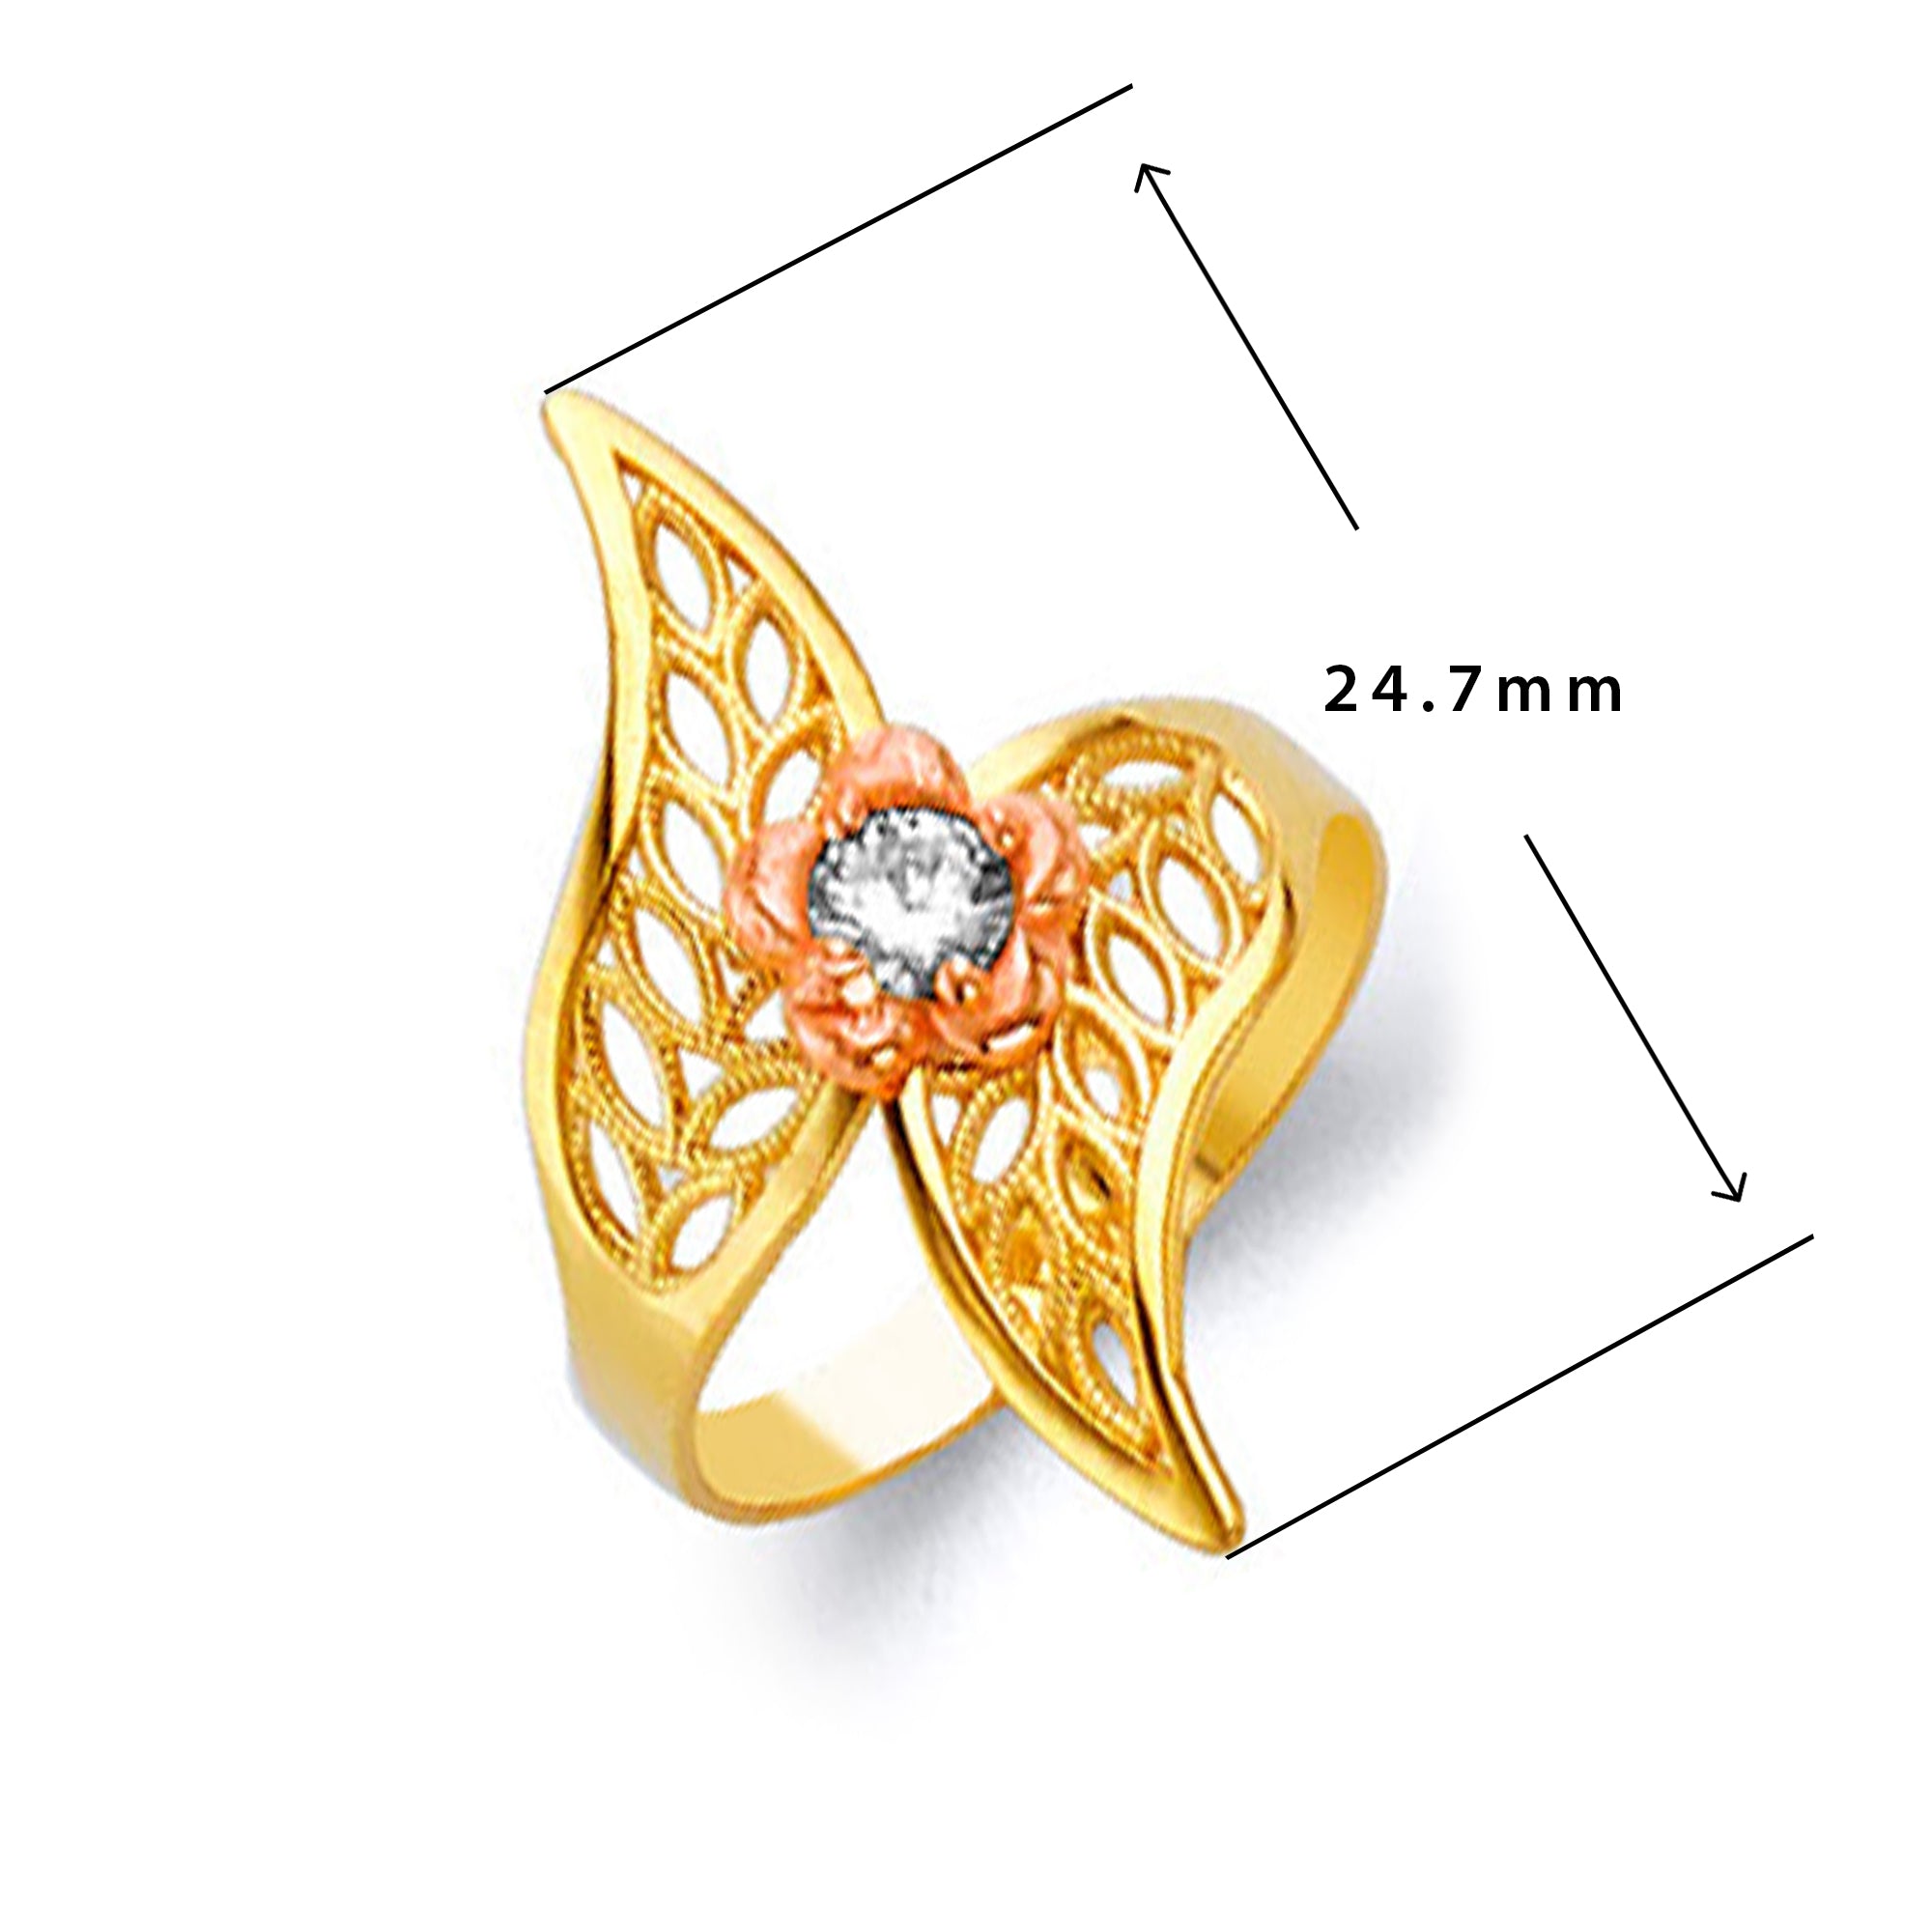 Embroidered Wings Floral Ring in Solid Gold with Measurement